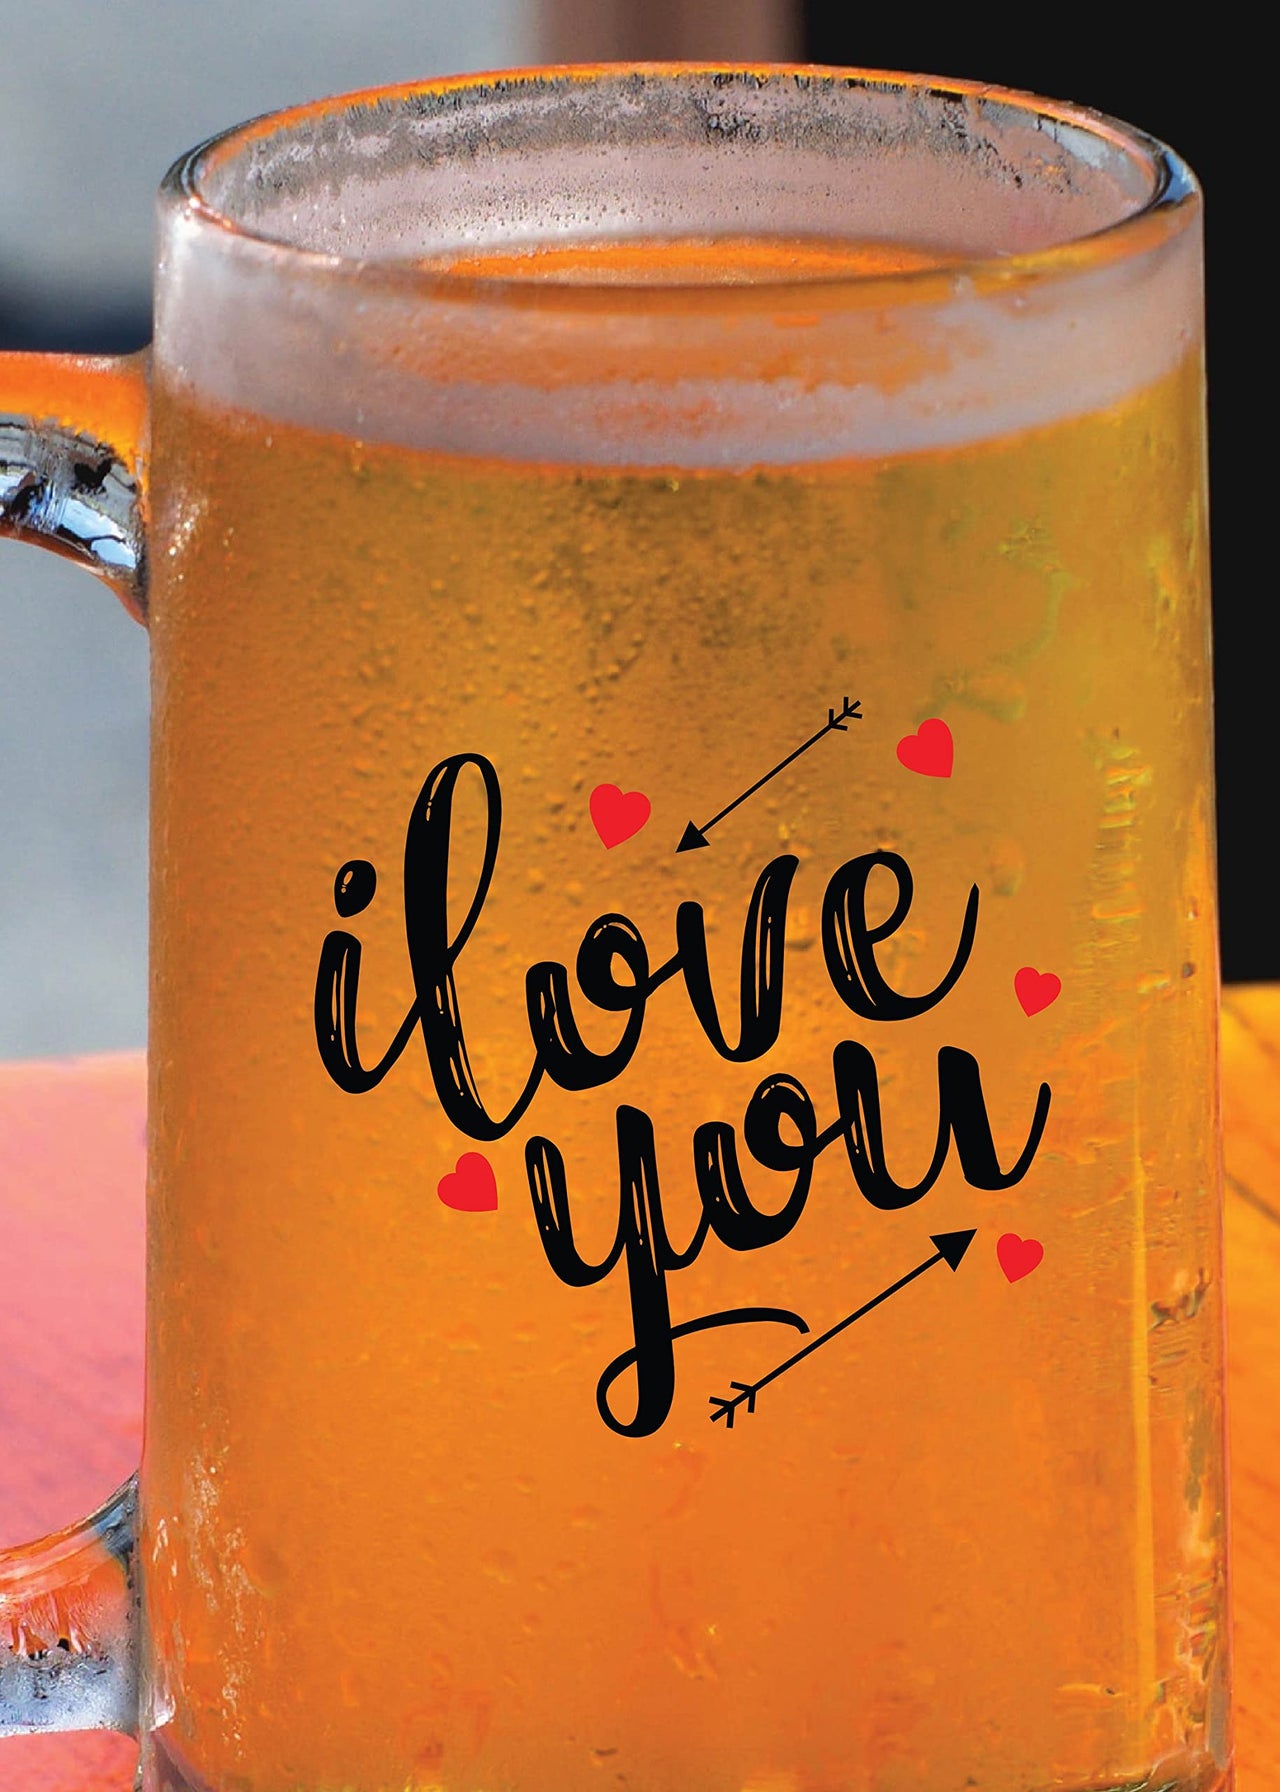 I Love You - Beer Mug - 1 Piece, Clear, 500 ml - Transparent Glass Beer Mug - Printed Beer Mug with Handle Gift for Men, Dad, Brother, Wife, Girlfriend